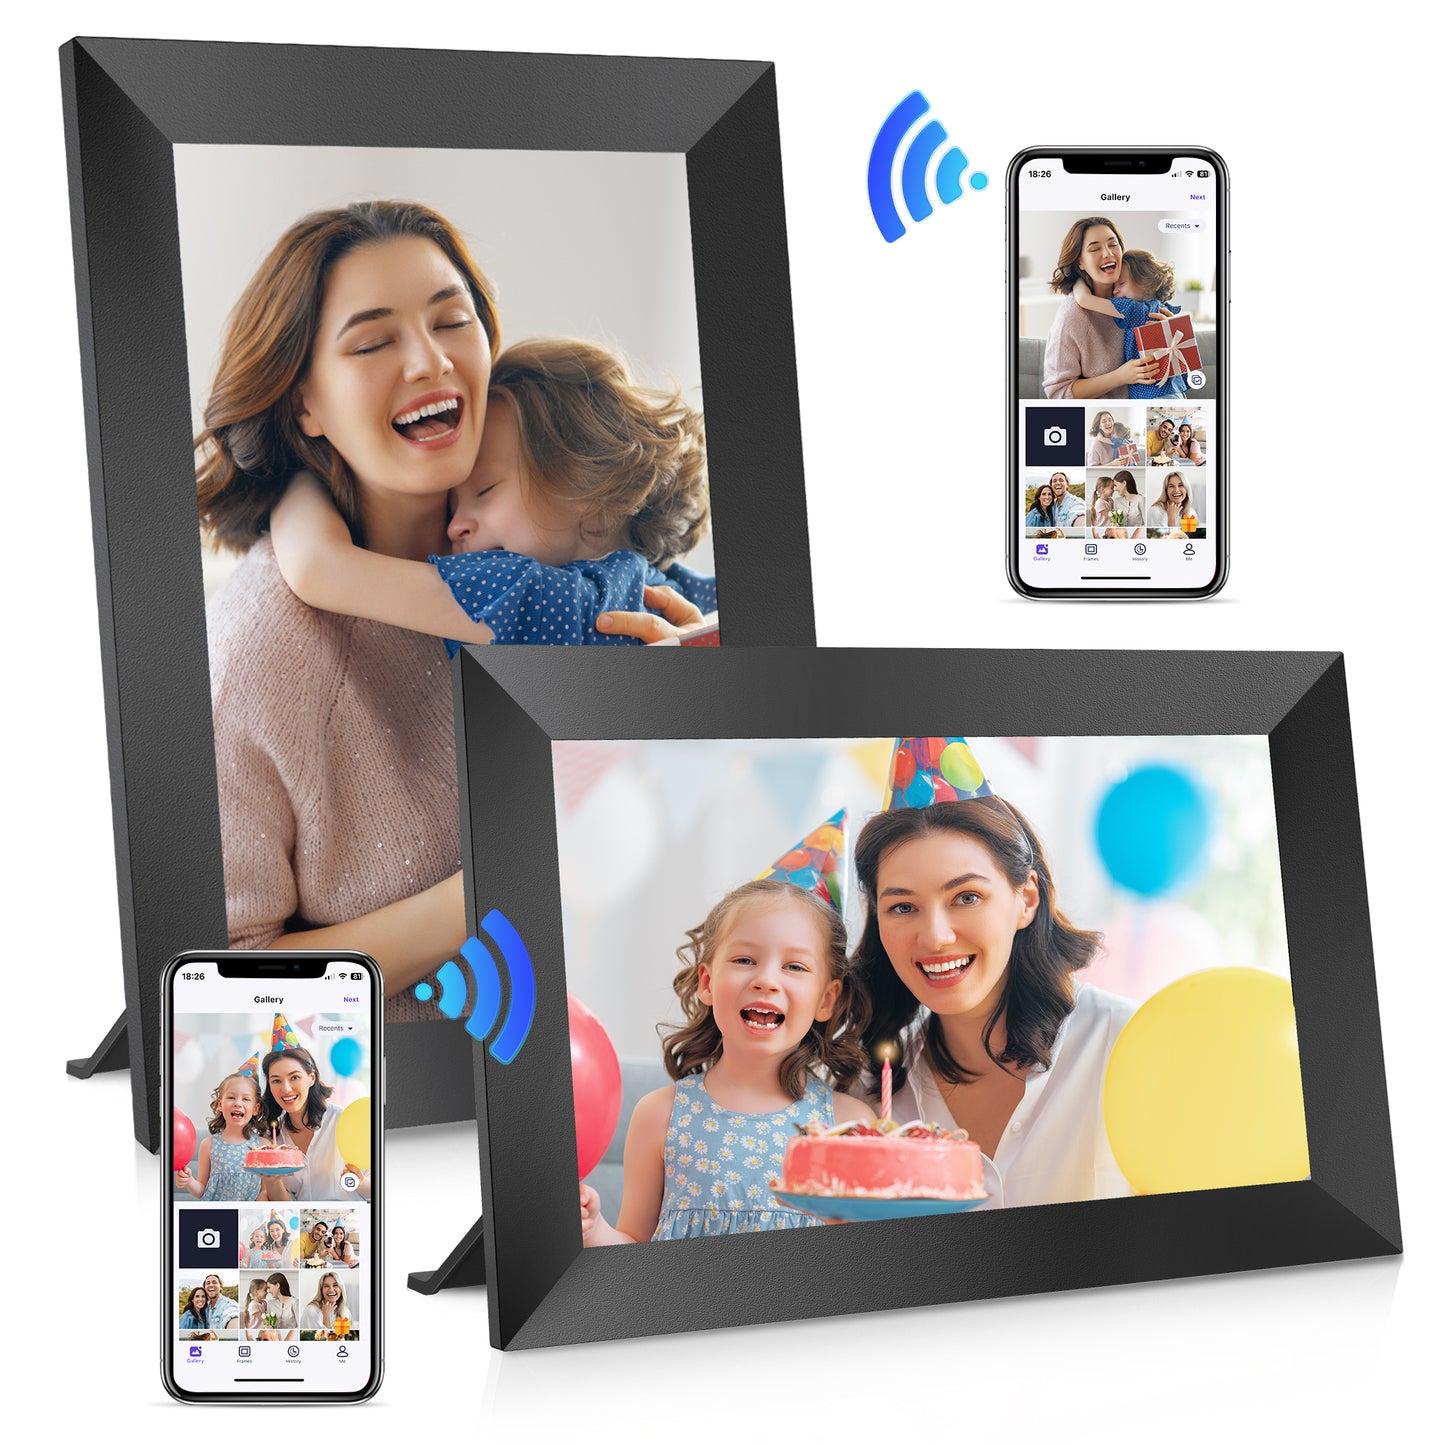 Mollan 32GB 10.1inch WiFi Digital Picture Frame (2 pack), Smart digital photo Frames 1080P IPS Touch Screen, Auto-Rotate, Wall Mountable, Share Photos Instantly via Free & Secure App from Anywhere